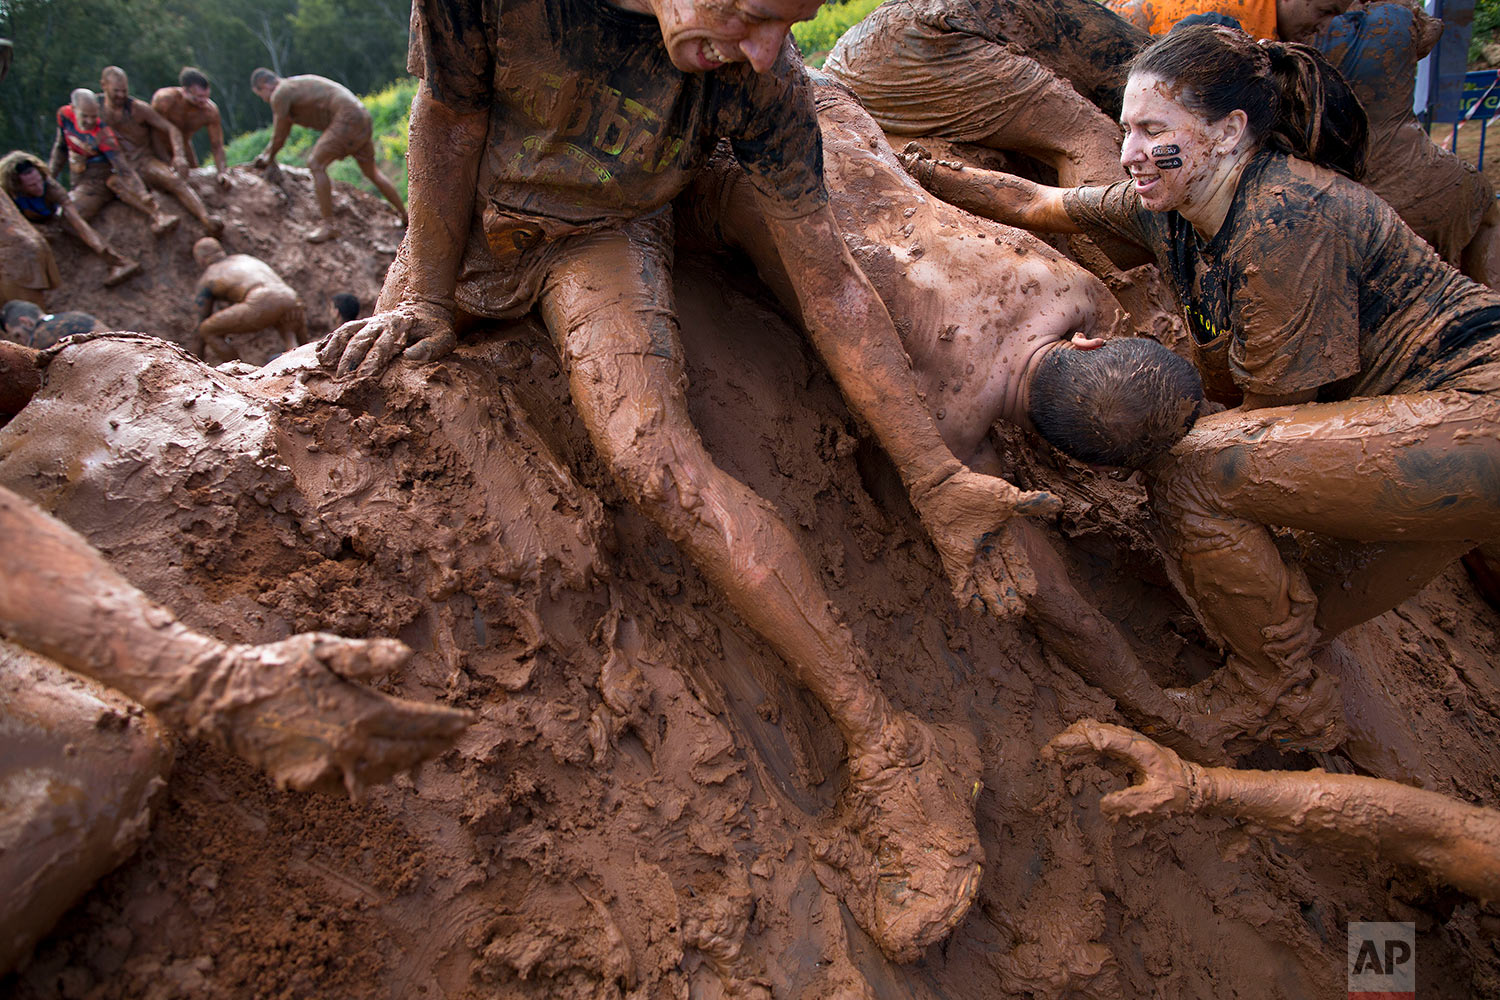  People take part in the Mud Day race, a 13 kilometer obstacle course in Tel Aviv, Israel, Friday, March 24, 2017. (AP Photo/Oded Balilty) 